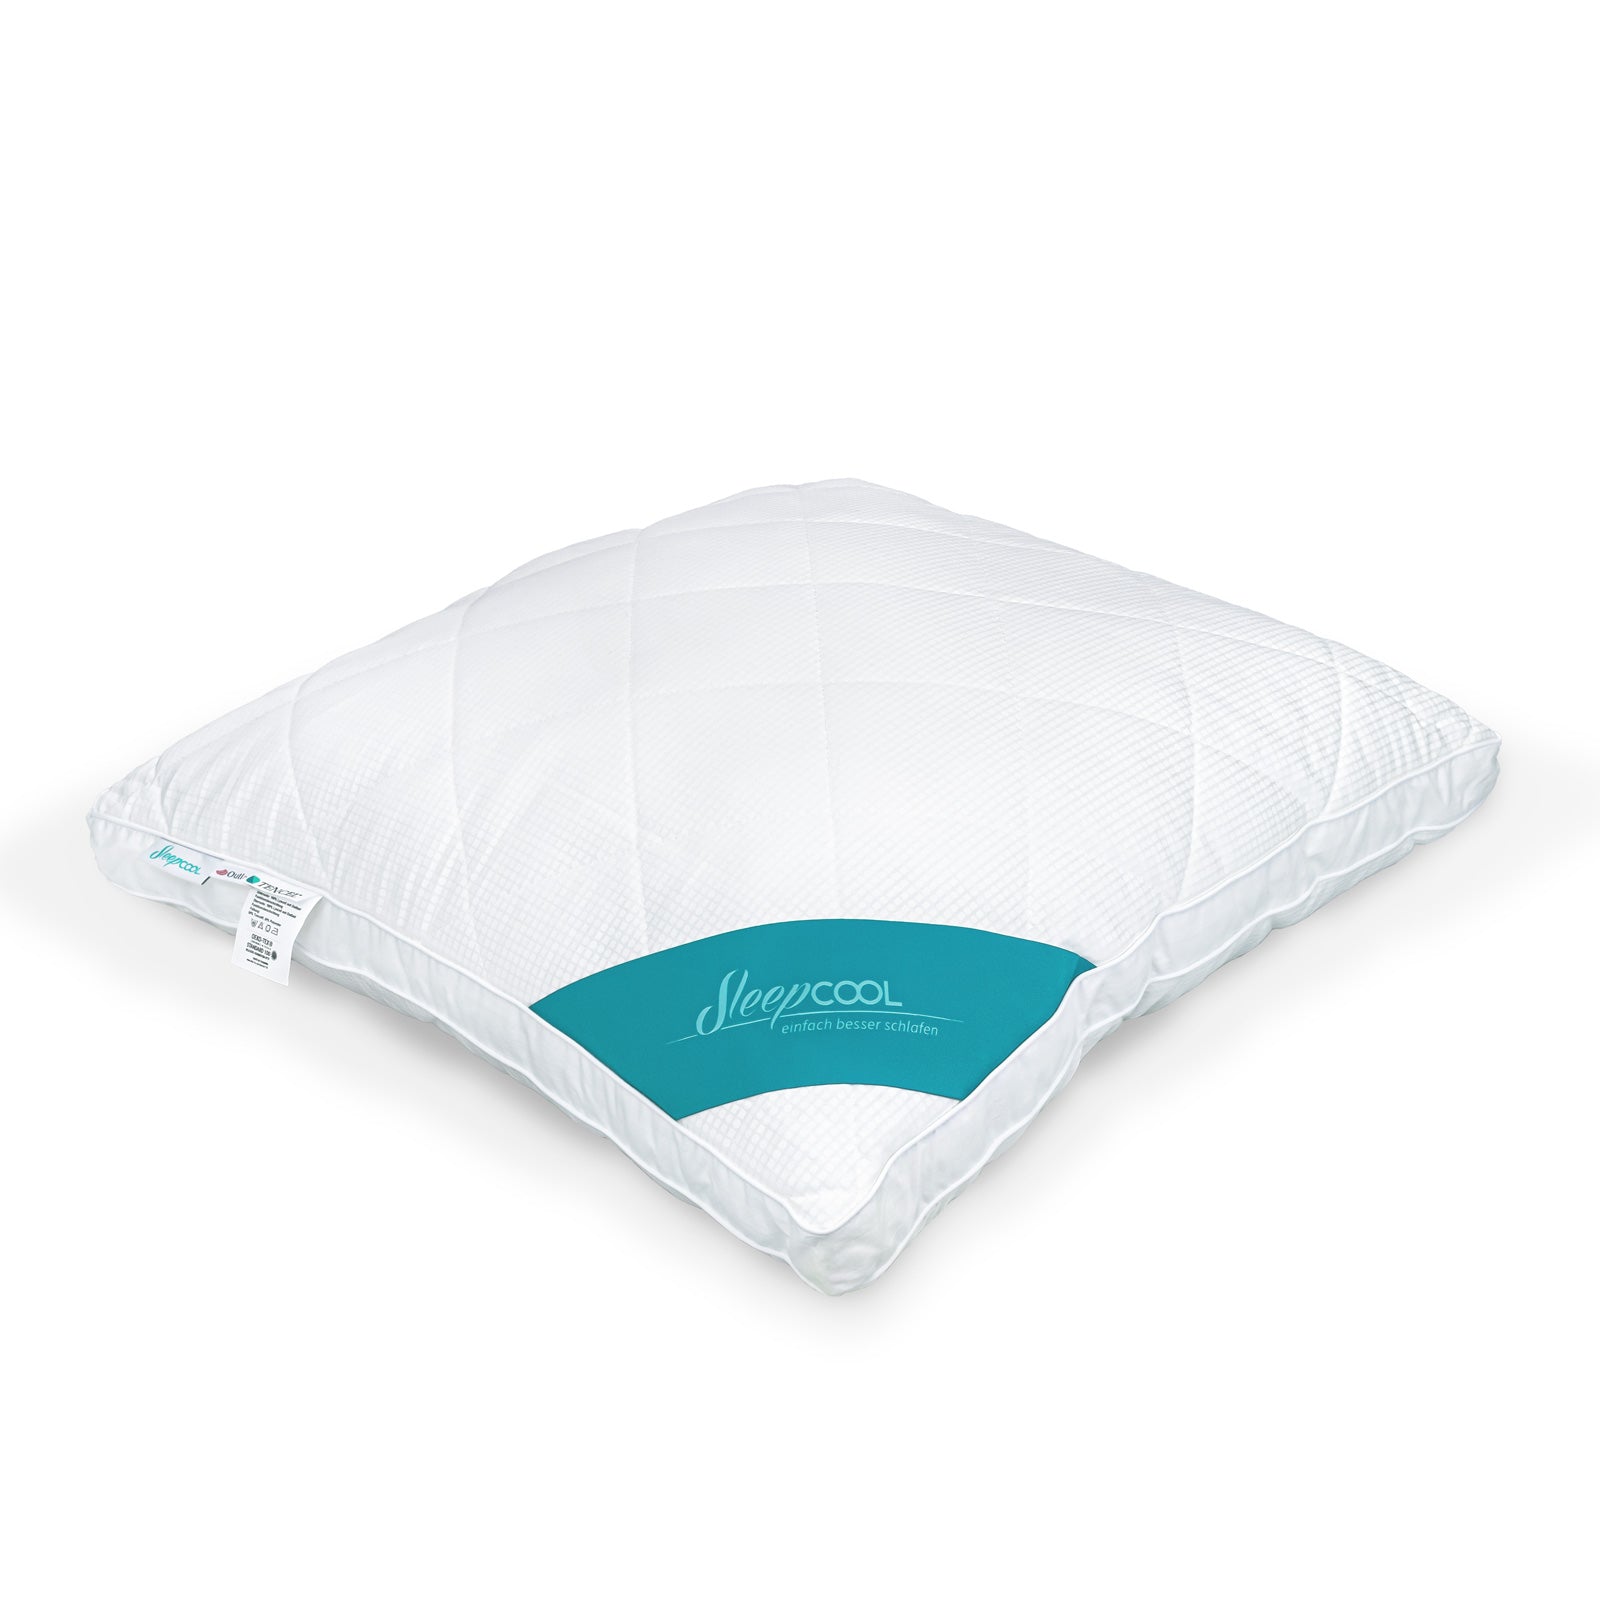 Chilling pillow COOL.MOMENTS-Voluminous, breathable and climate-friendly cushion